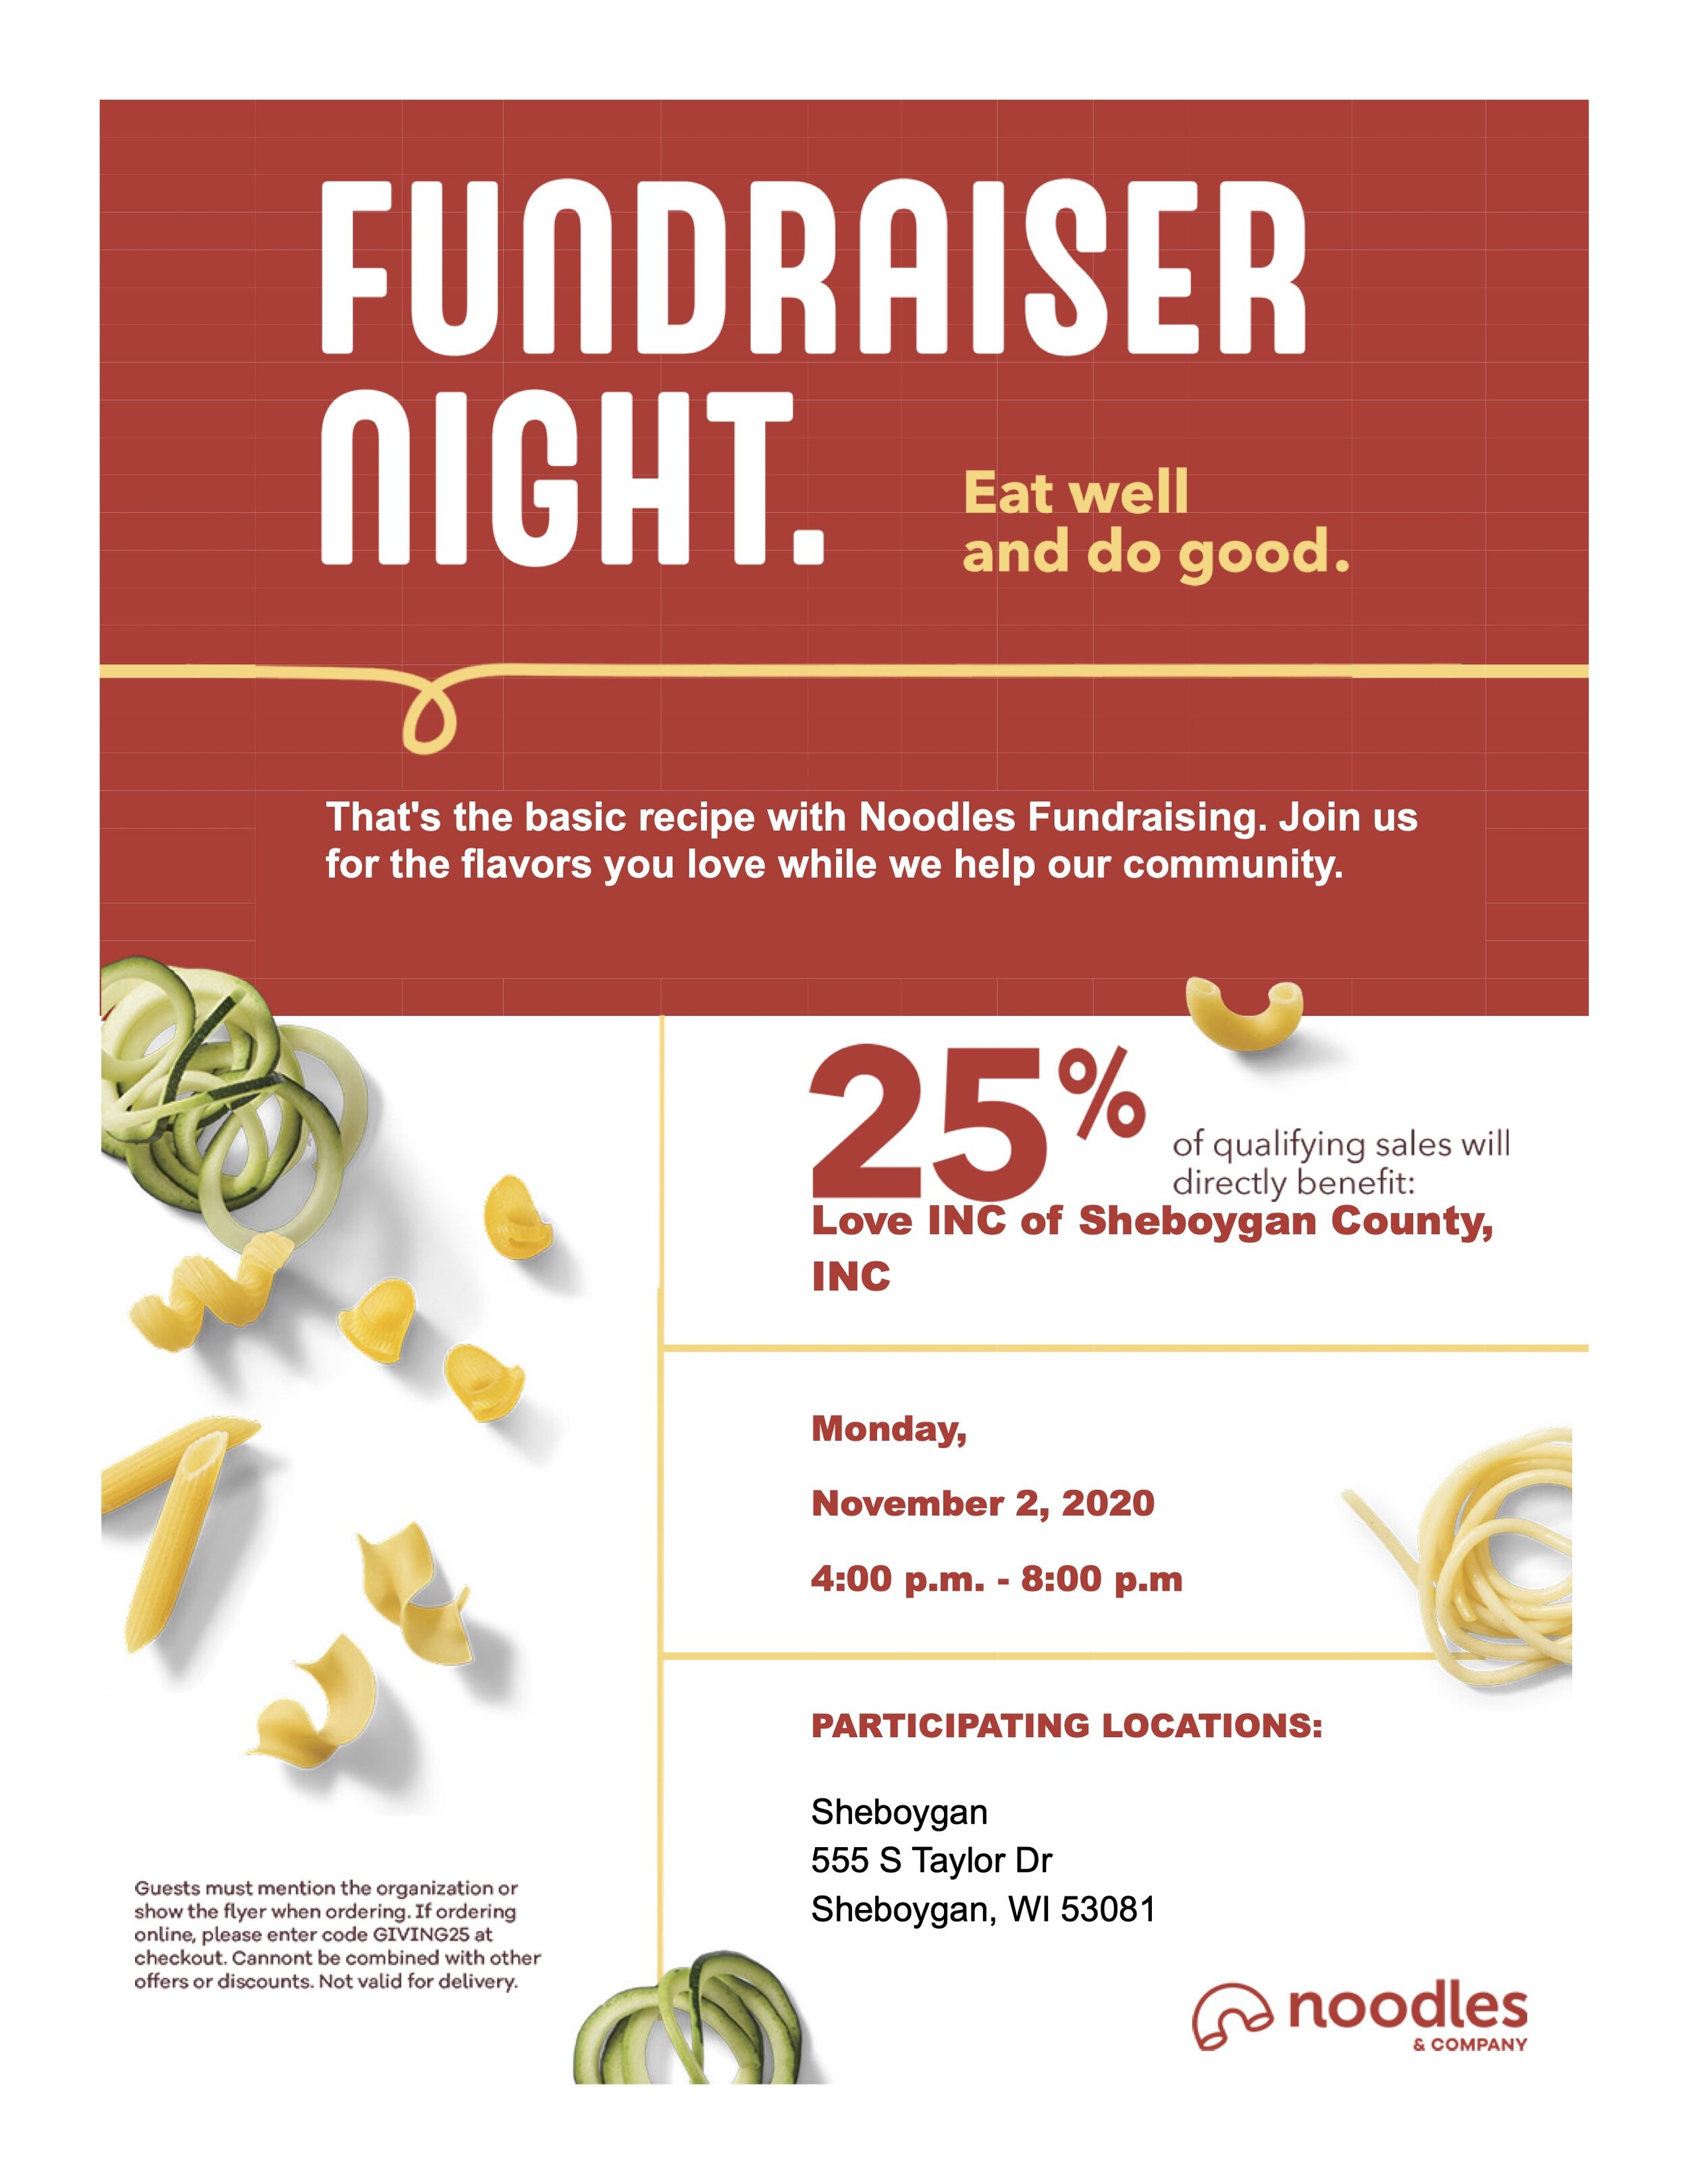 Dine & Donate - Noodles & Co. — Love INC of Sheboygan County